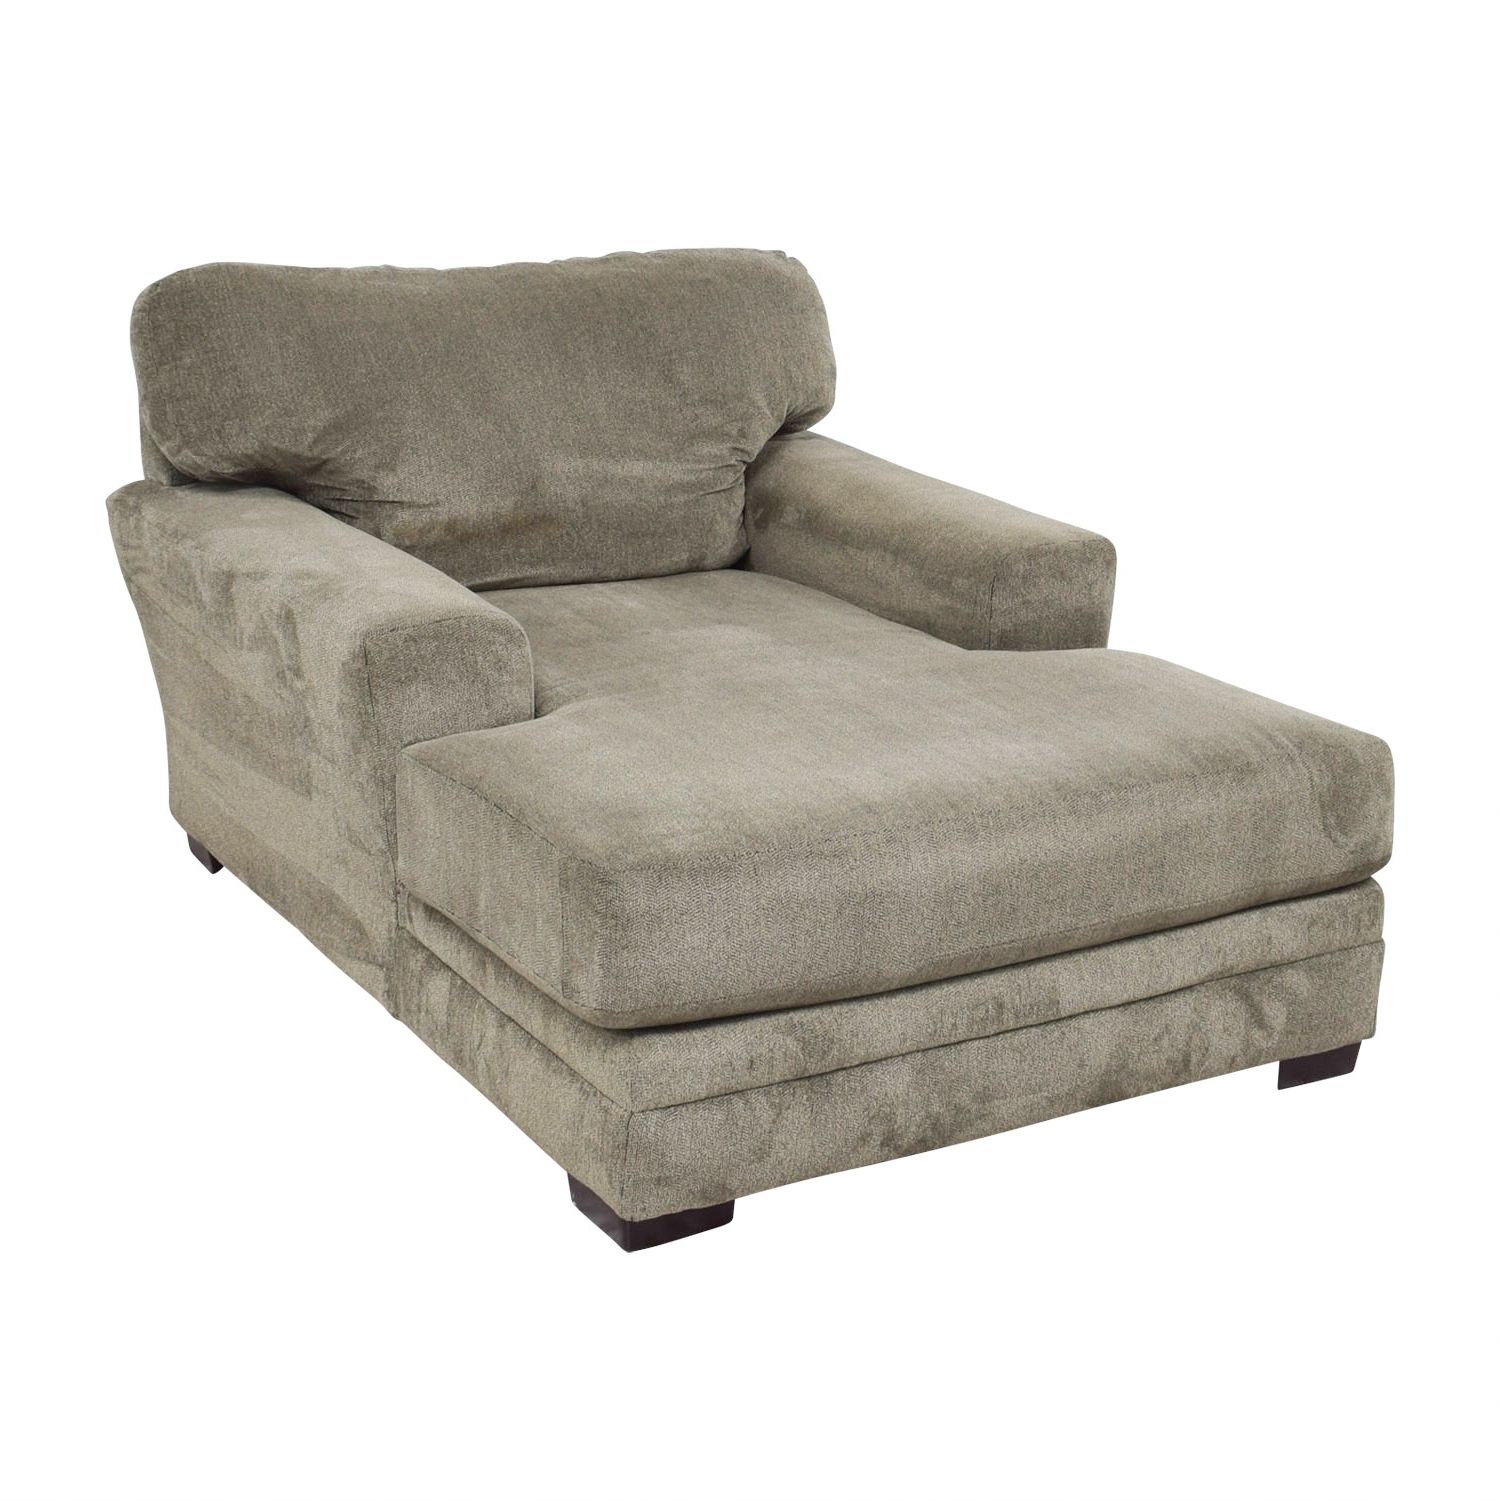 [%81% Off – Bob's Furniture Bob's Furniture Grey Chaise Lounge / Sofas Regarding Well Liked Grey Chaises|grey Chaises For Newest 81% Off – Bob's Furniture Bob's Furniture Grey Chaise Lounge / Sofas|popular Grey Chaises With 81% Off – Bob's Furniture Bob's Furniture Grey Chaise Lounge / Sofas|best And Newest 81% Off – Bob's Furniture Bob's Furniture Grey Chaise Lounge / Sofas With Grey Chaises%] (View 5 of 15)